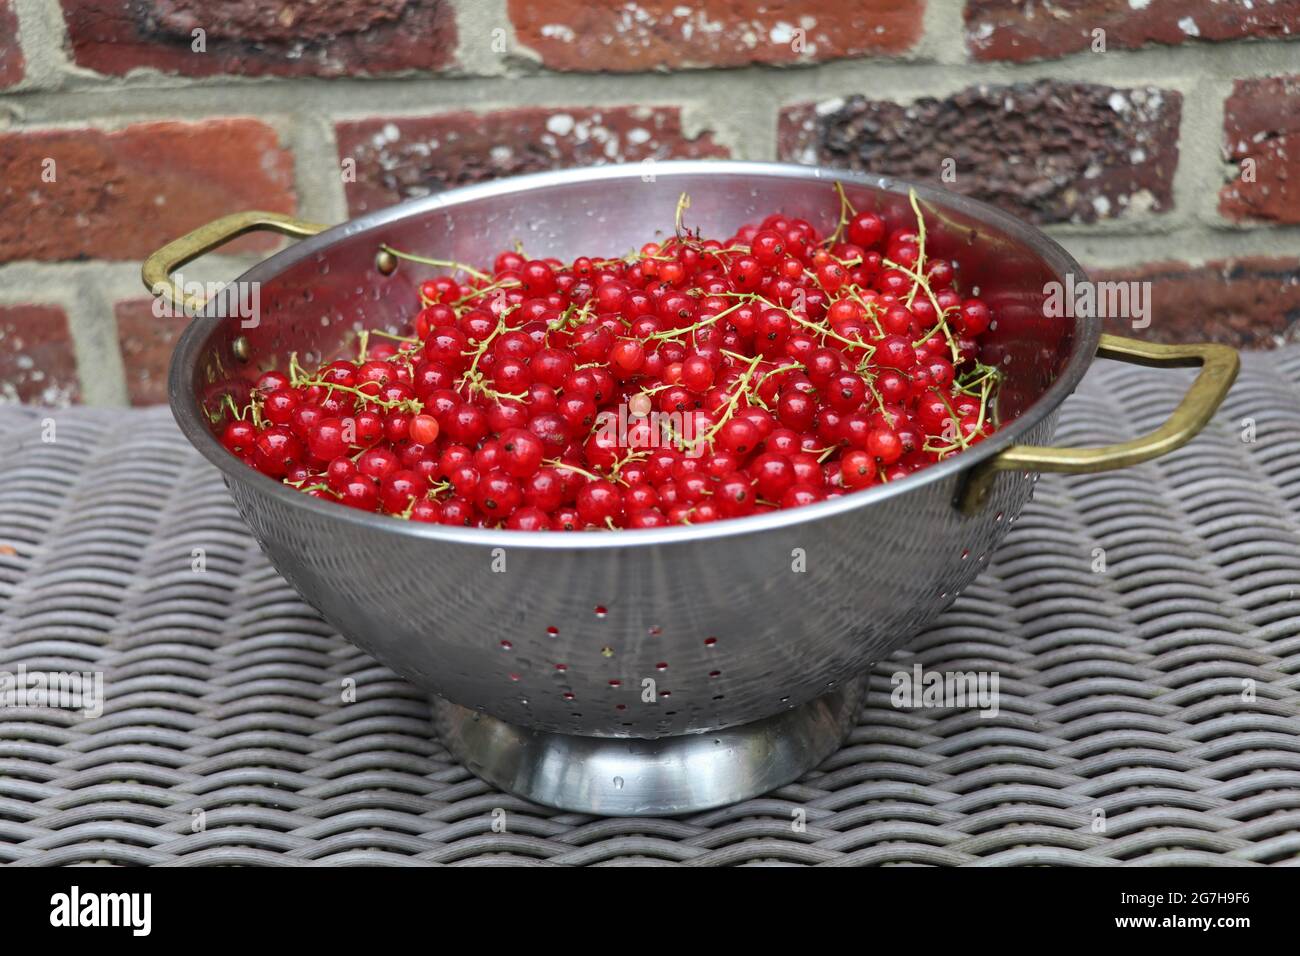 freshly picked redcurrants in a vintage colander Stock Photo